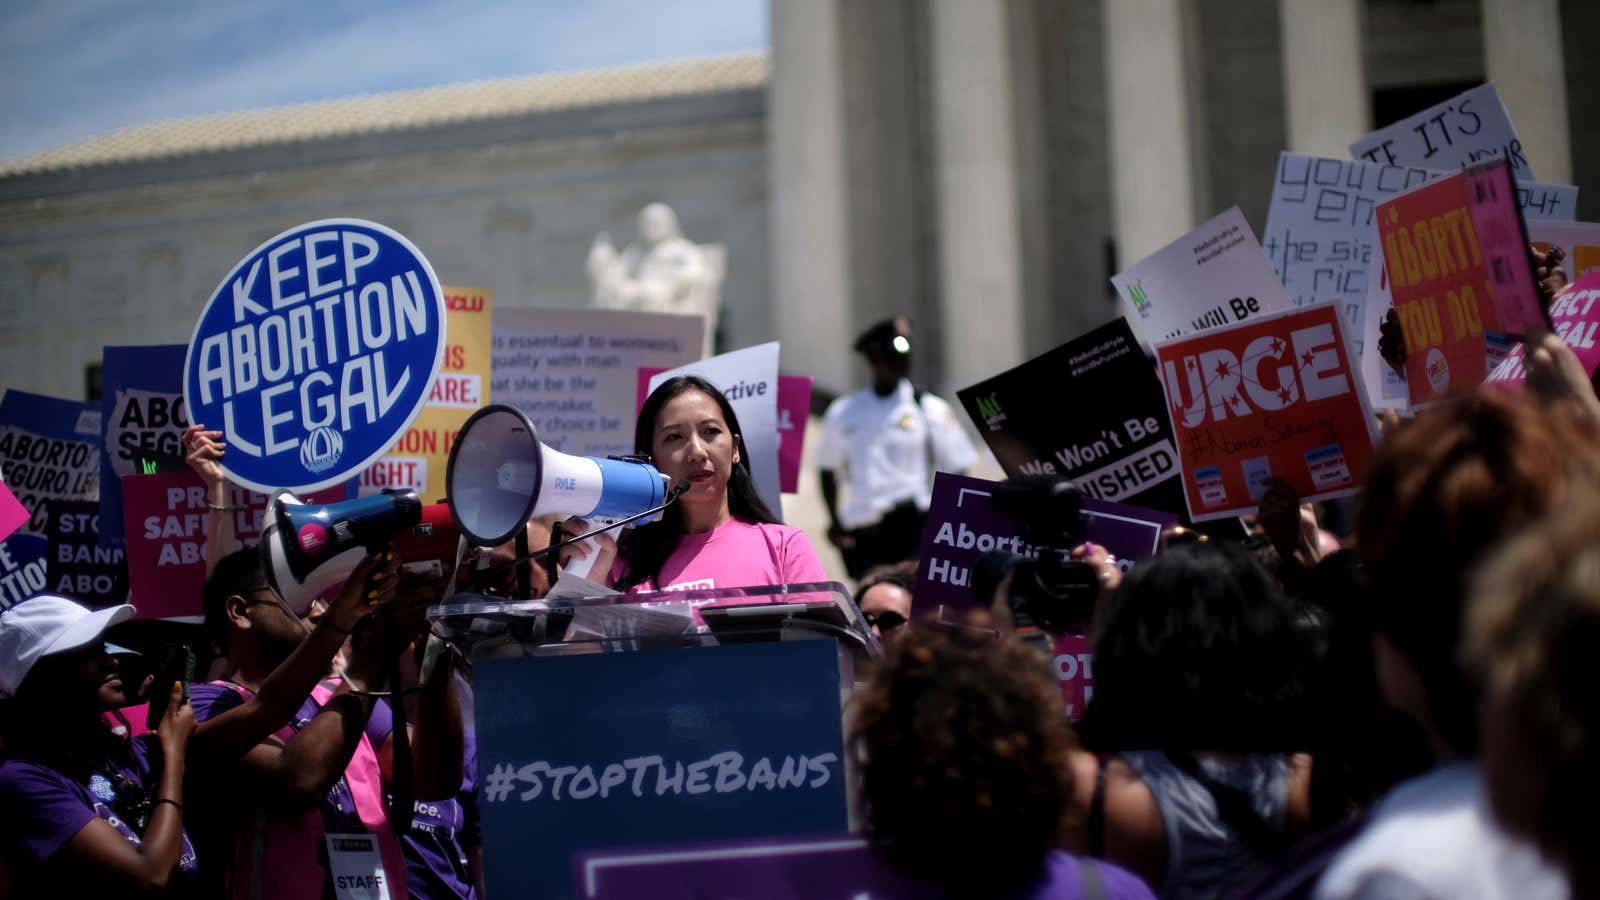 Planned Parenthood president Dr. Leana Wen speaks at a protest against anti-abortion legislation at the U.S. Supreme Court in Washington, U.S., May 21, 2019.